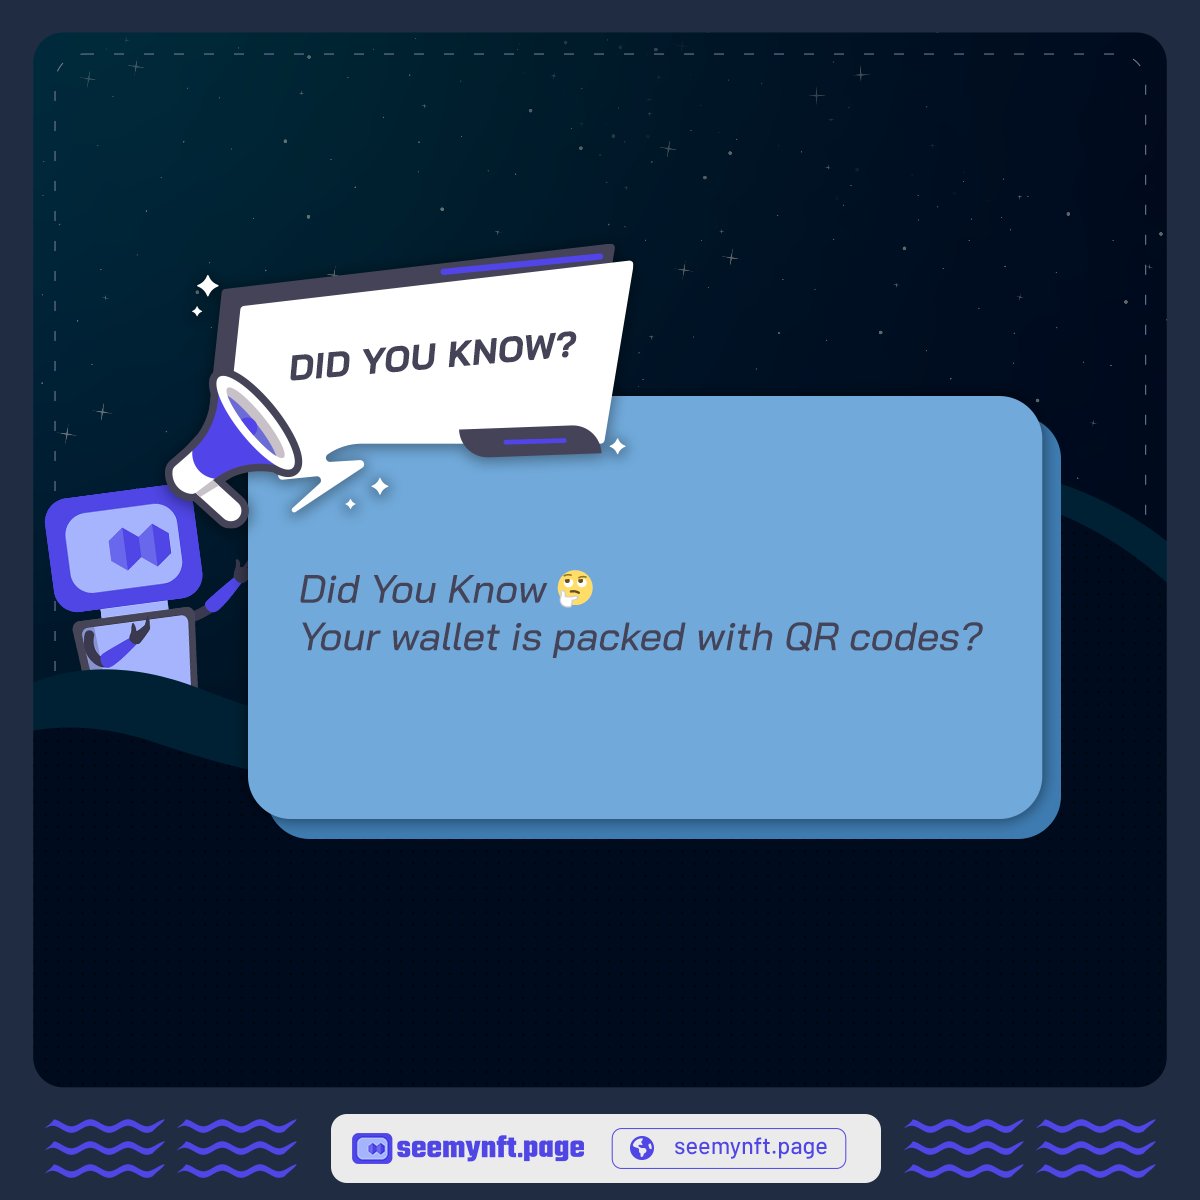 📲🚀 Wallet QR Codes: Unveiled! Did You Know? Your wallet conceals QR code gems, including NFT Ticket, Contact Card, Wallet Viewing, and Wallet Referral. Join us for a wallet adventure like no other! seemynft.page #SeemyNFT #WalletRevelations #DiscoverMore